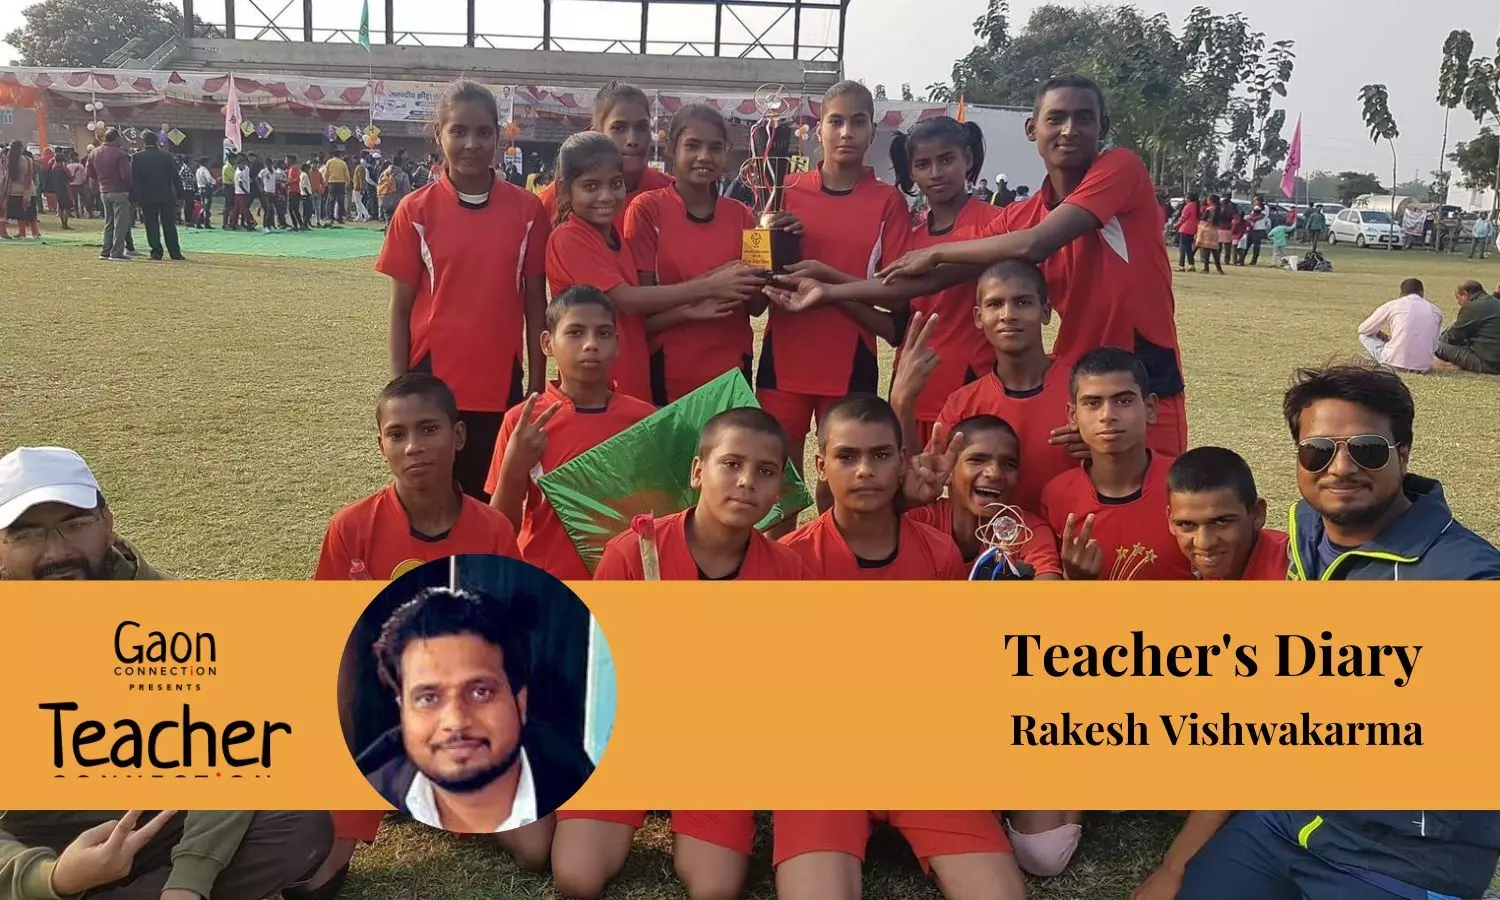 Teacher’s Diary: A School Where Children Are Excelling Not Only In Education But Also In Sports